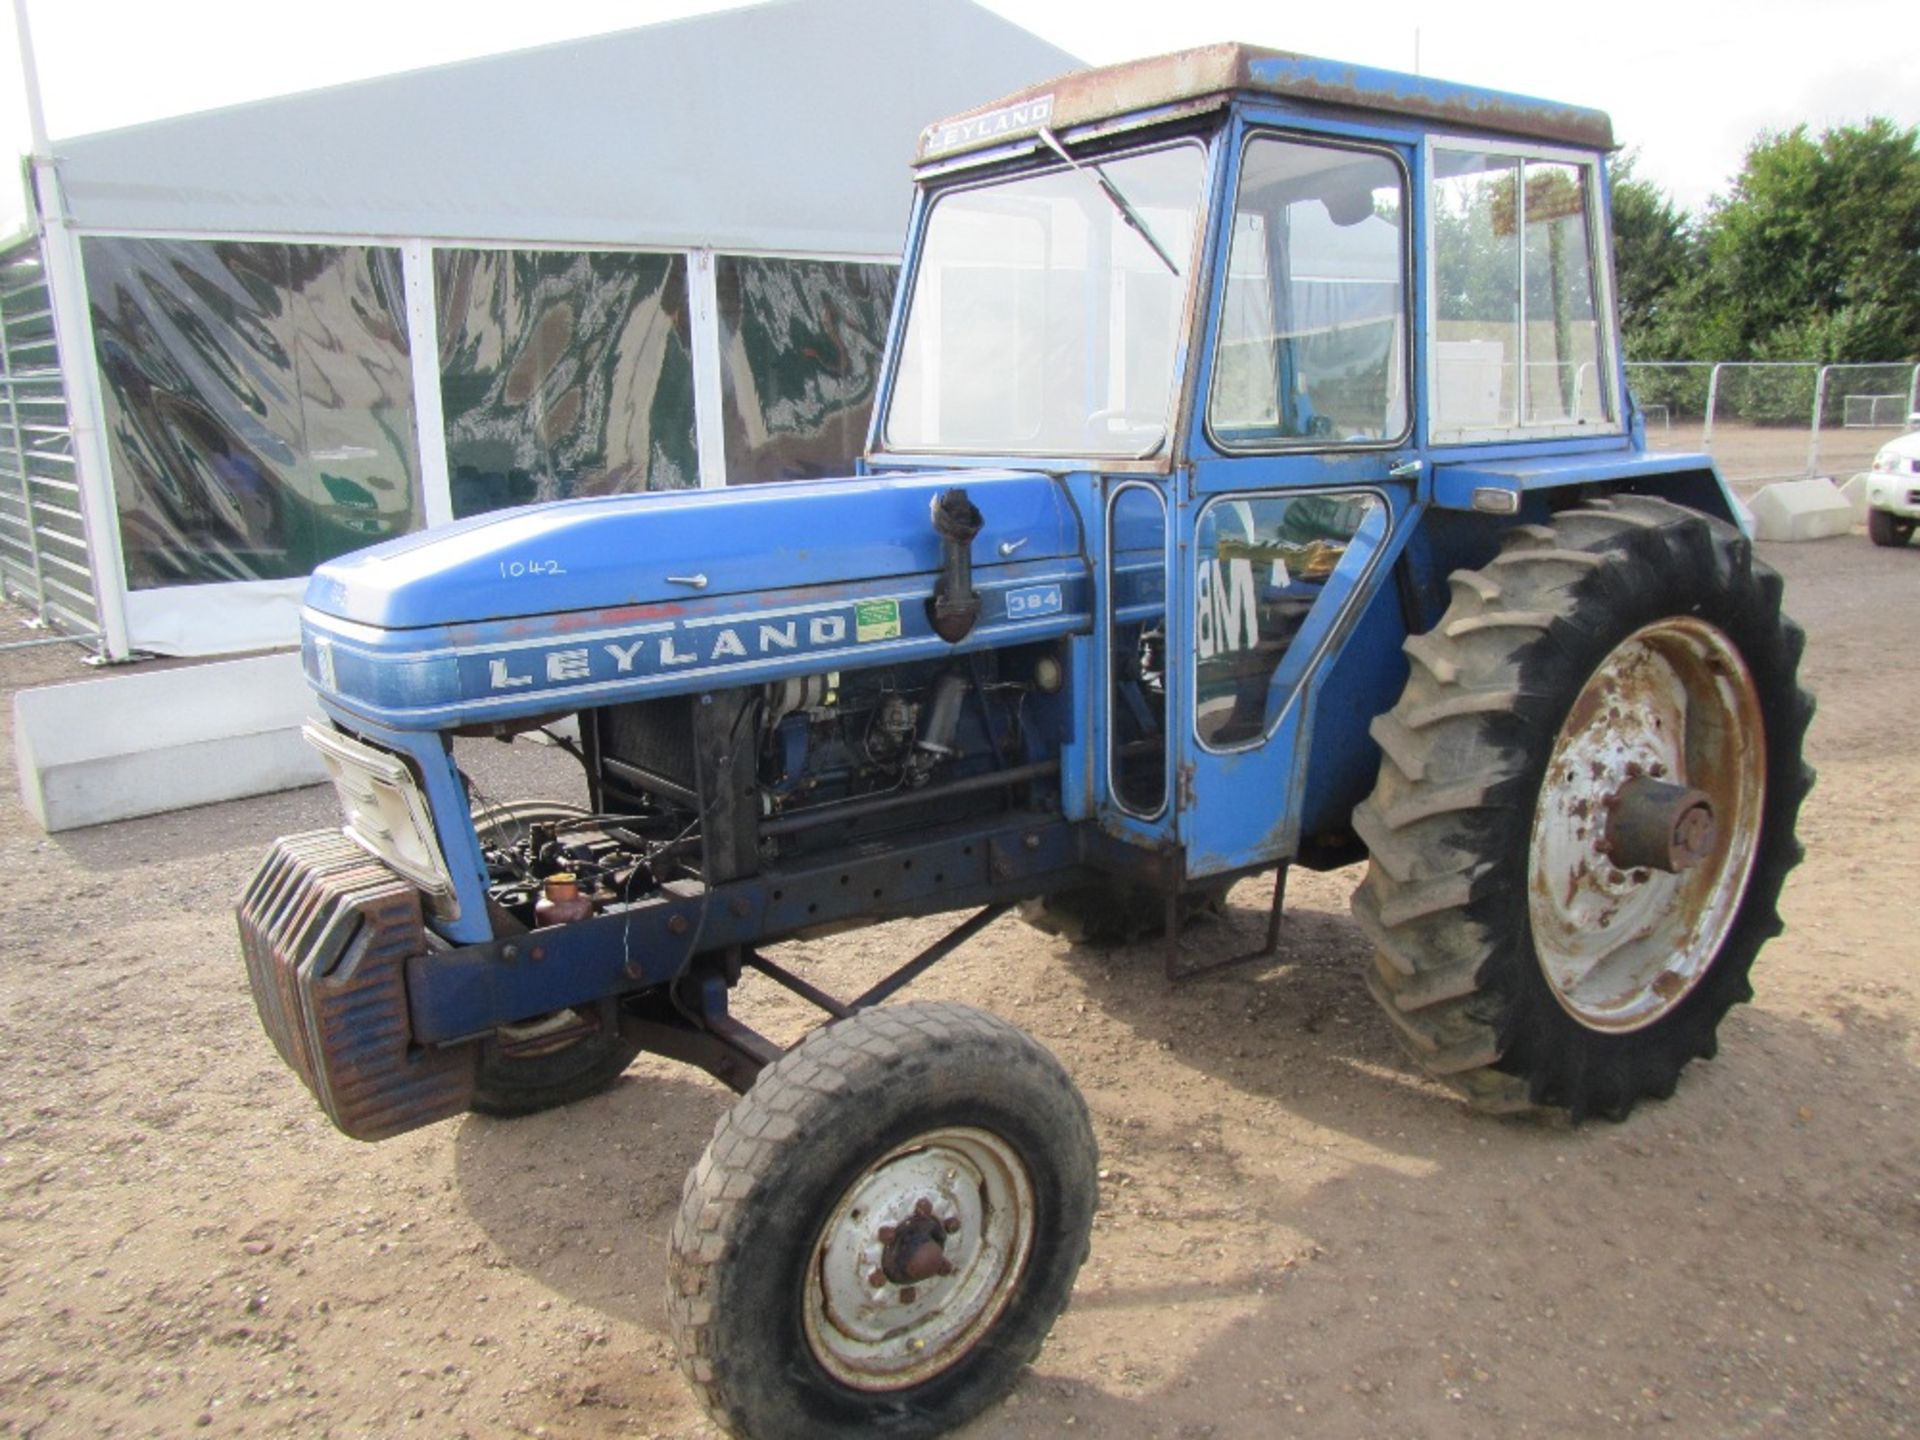 Leyland 384 2wd Tractor with Weights Reg No TJL 962K Ser No 301729 UNRESERVED LOT